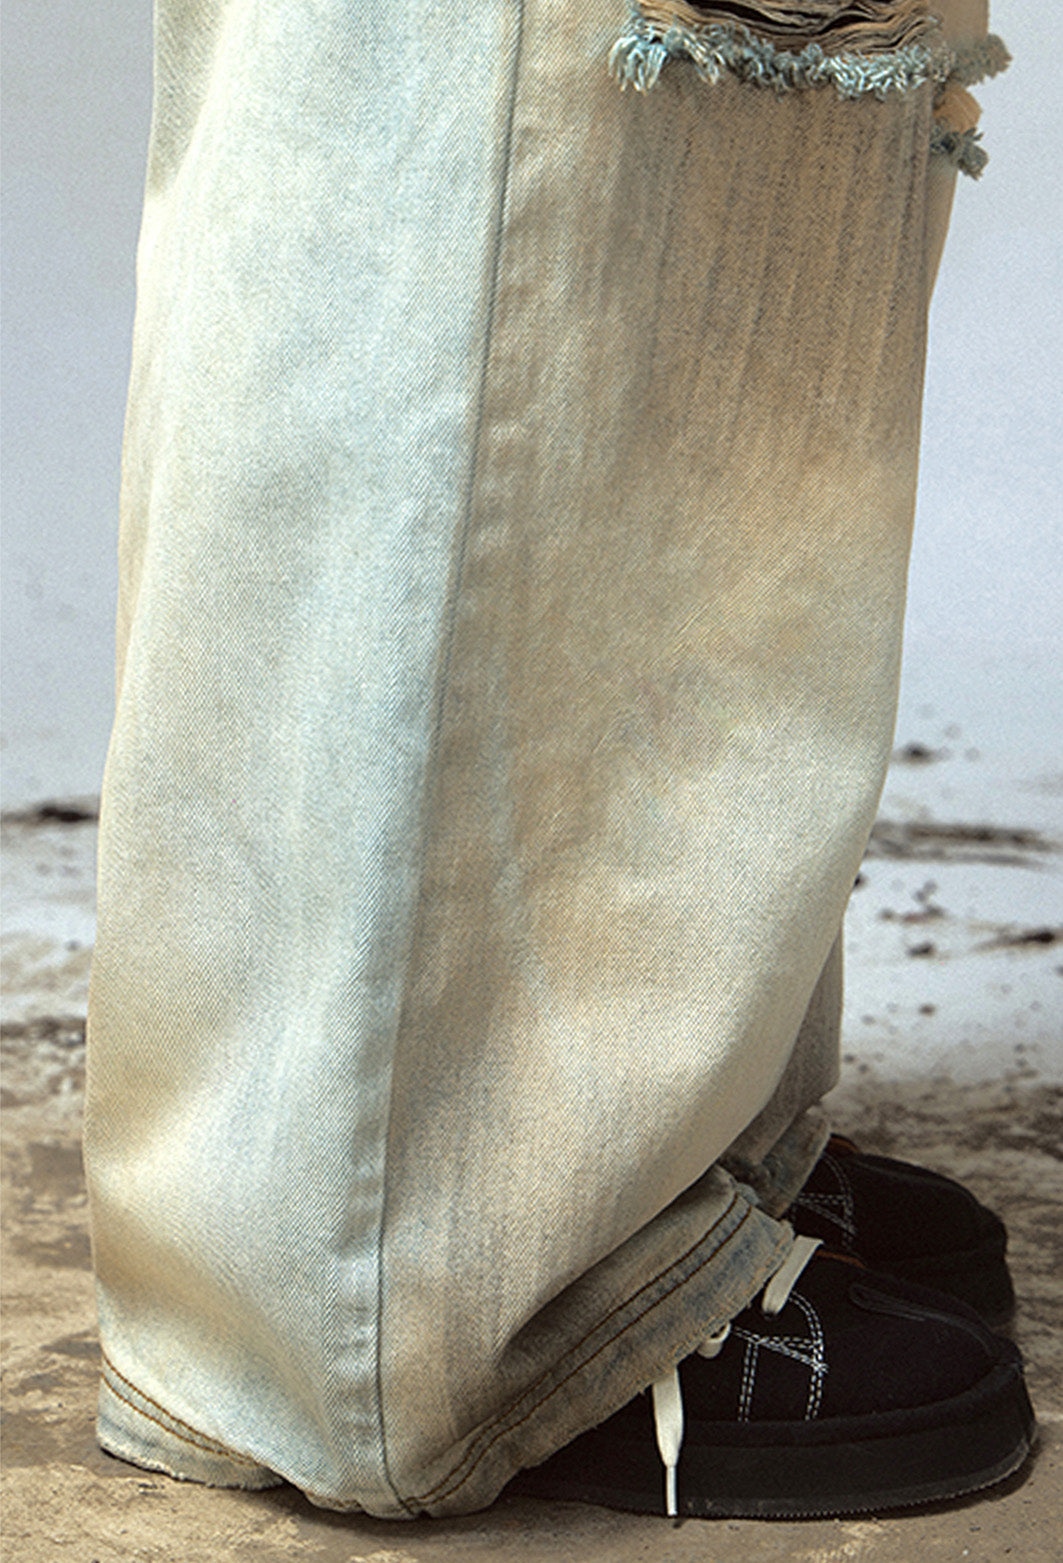 Mud-dyed washed straight jeans